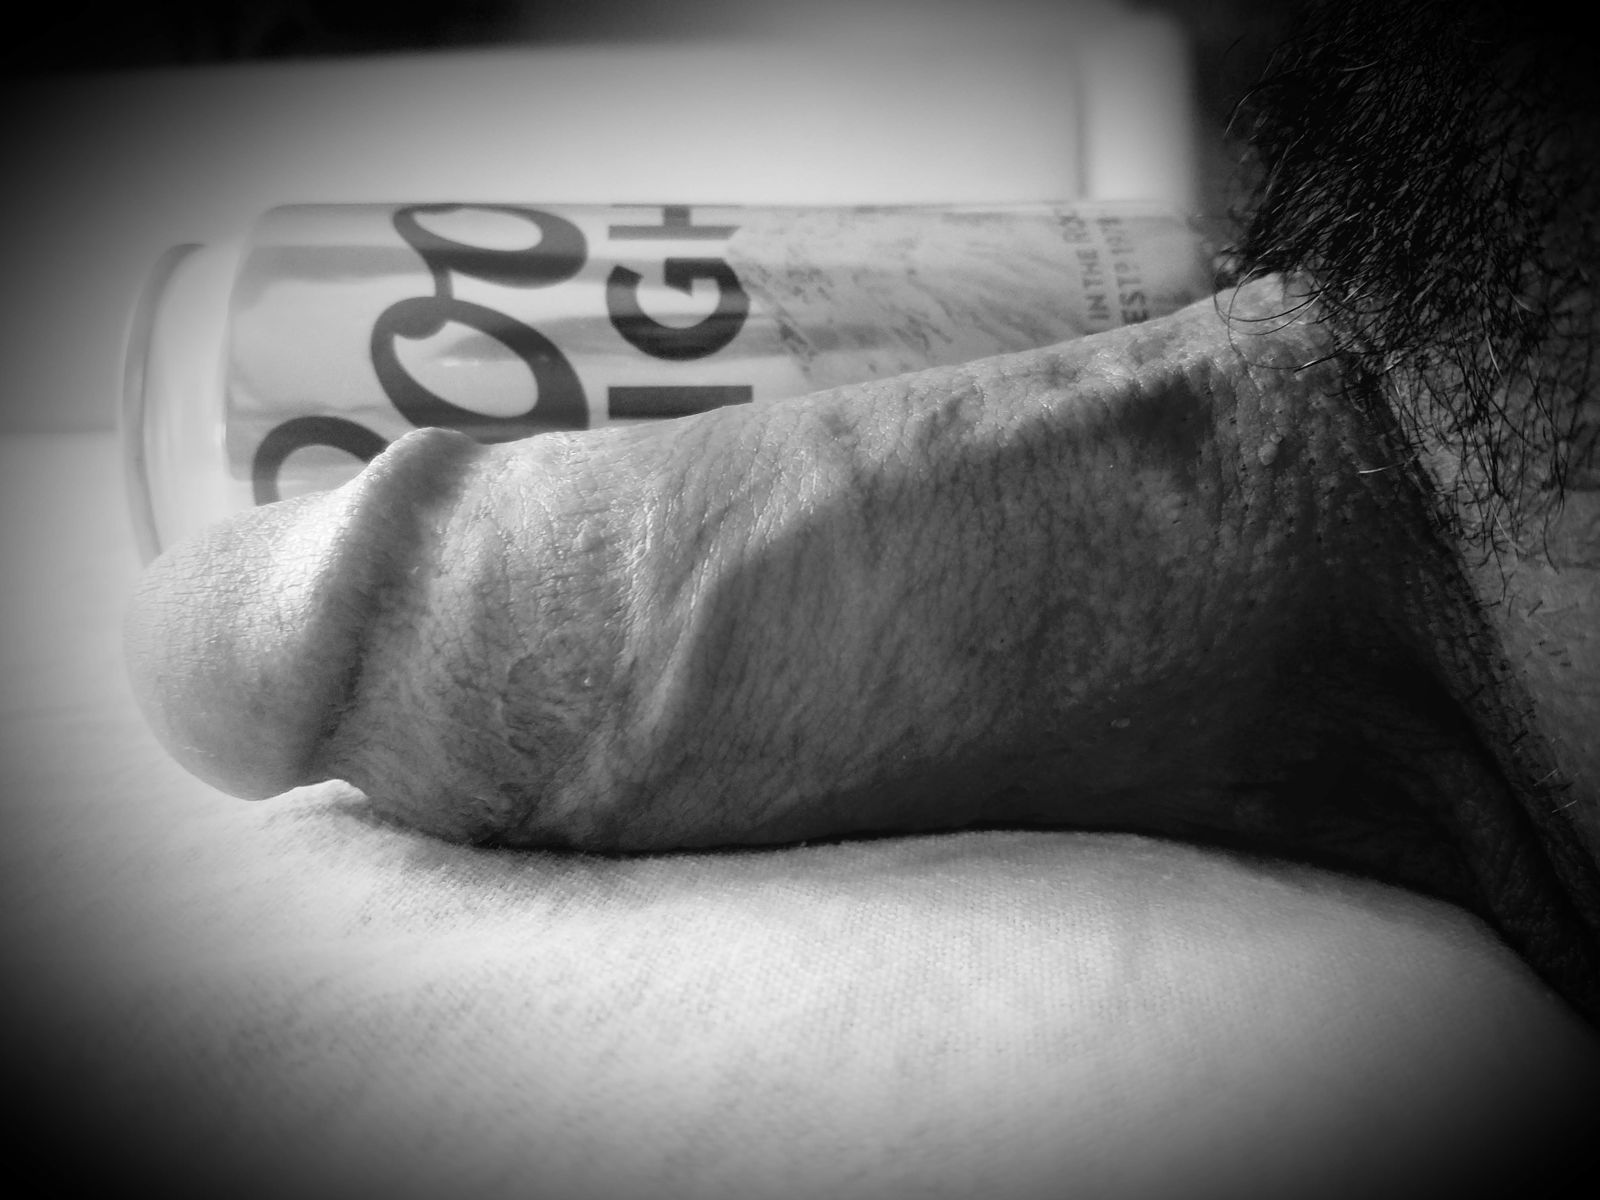 Photo by JK Rivers with the username @JKRivers, who is a verified user,  January 9, 2019 at 2:07 AM and the text says 'Silver Bullet
--
Not fully erect but love the vein and thickness'